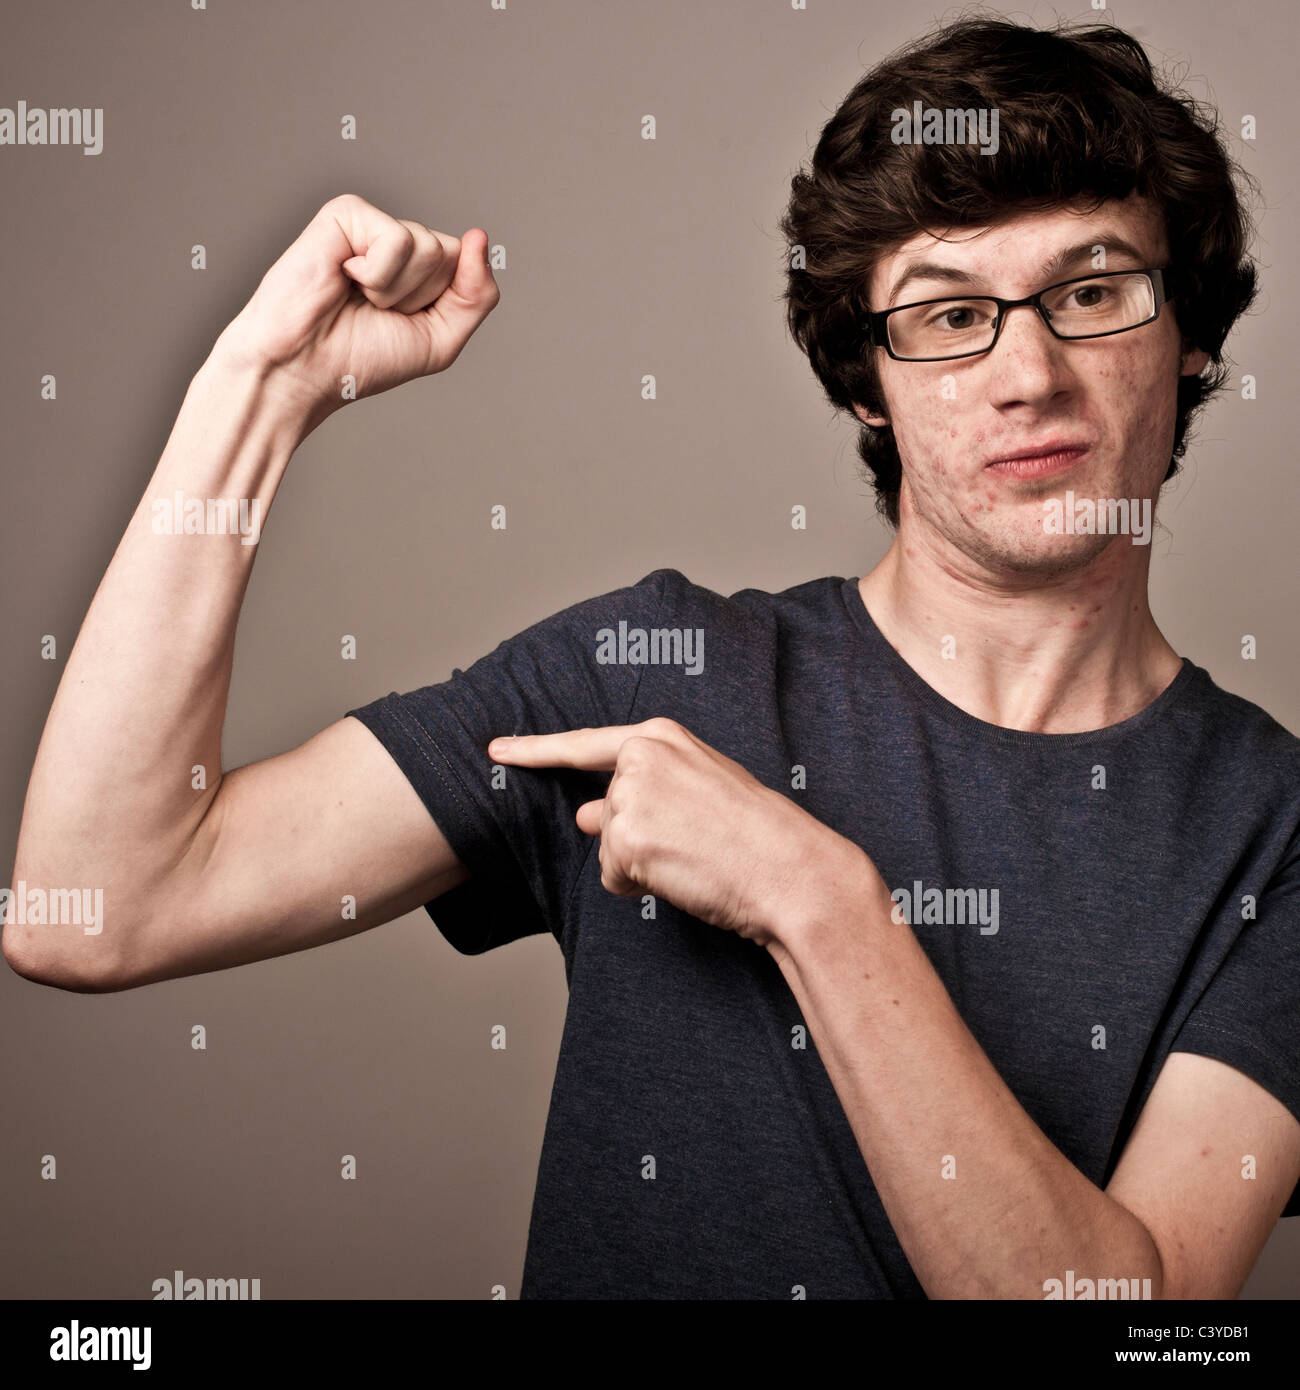 a weak feeble geek nerd young man with thin arms wearing glasses flexing his muscles Stock Photo